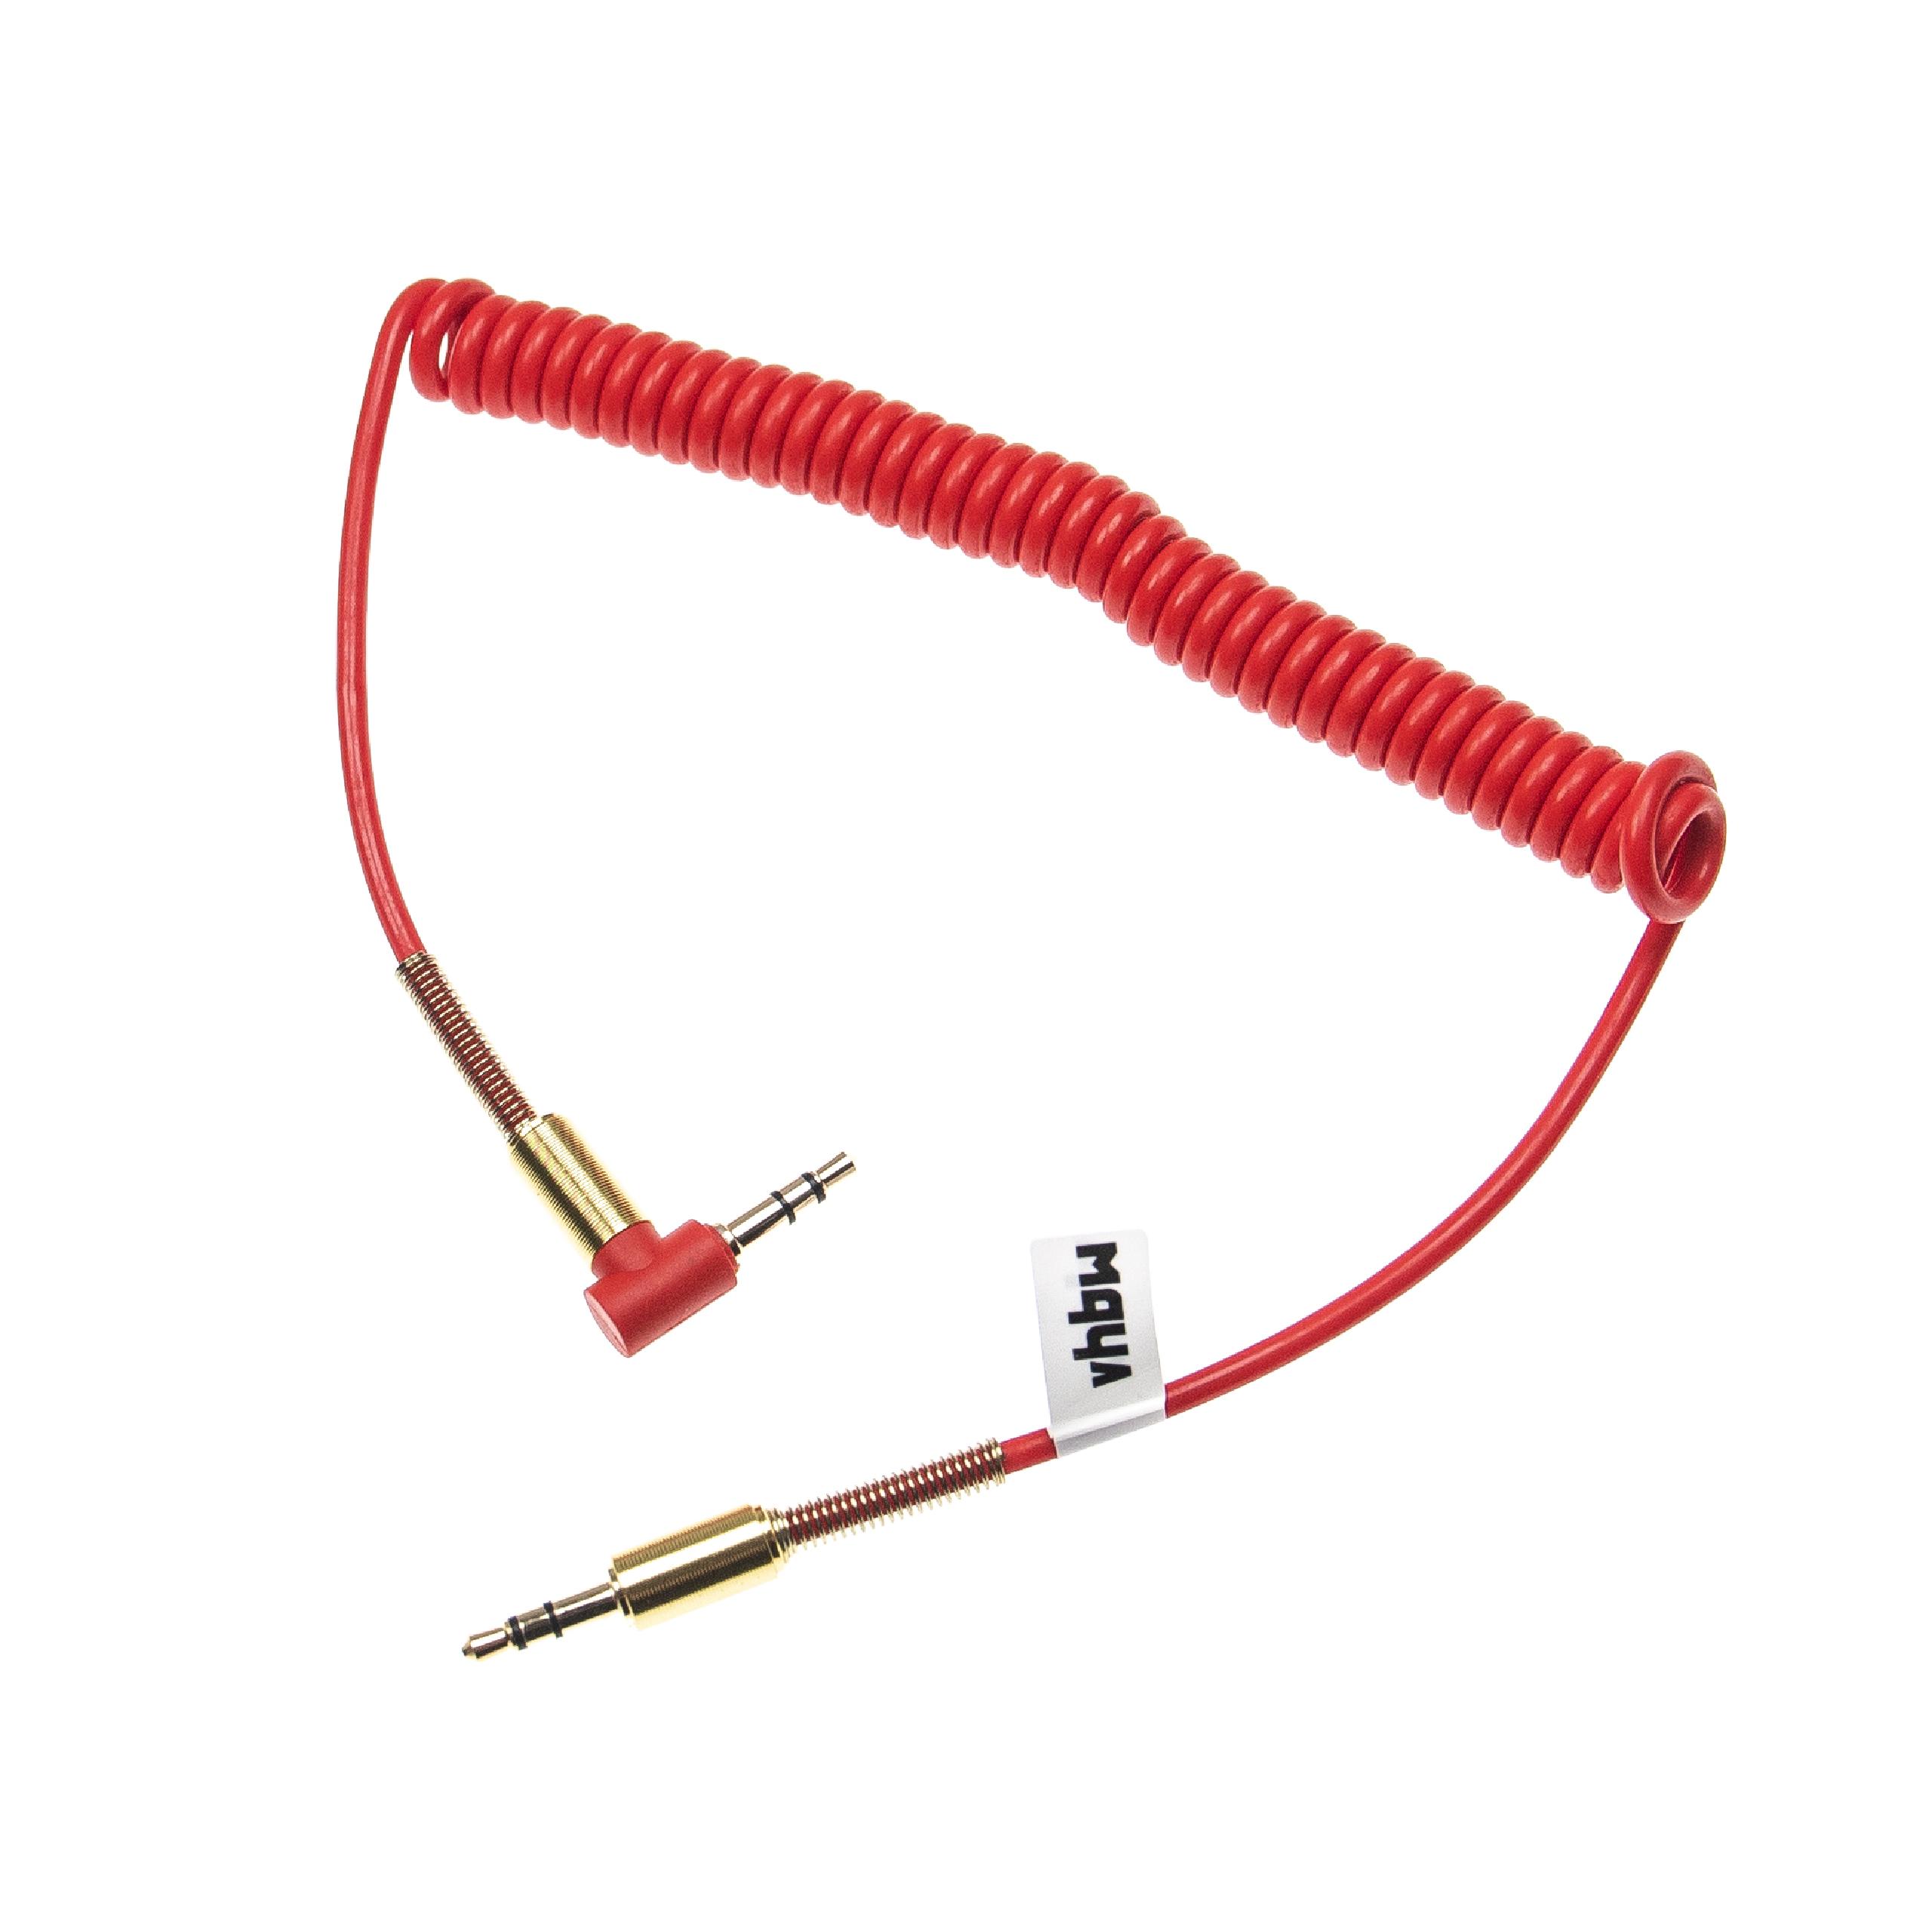 Stereo AUX Audio Cable Jack Adapter 3.5mm to 3.5mm - male to male, gold plated, right angle, gold / red